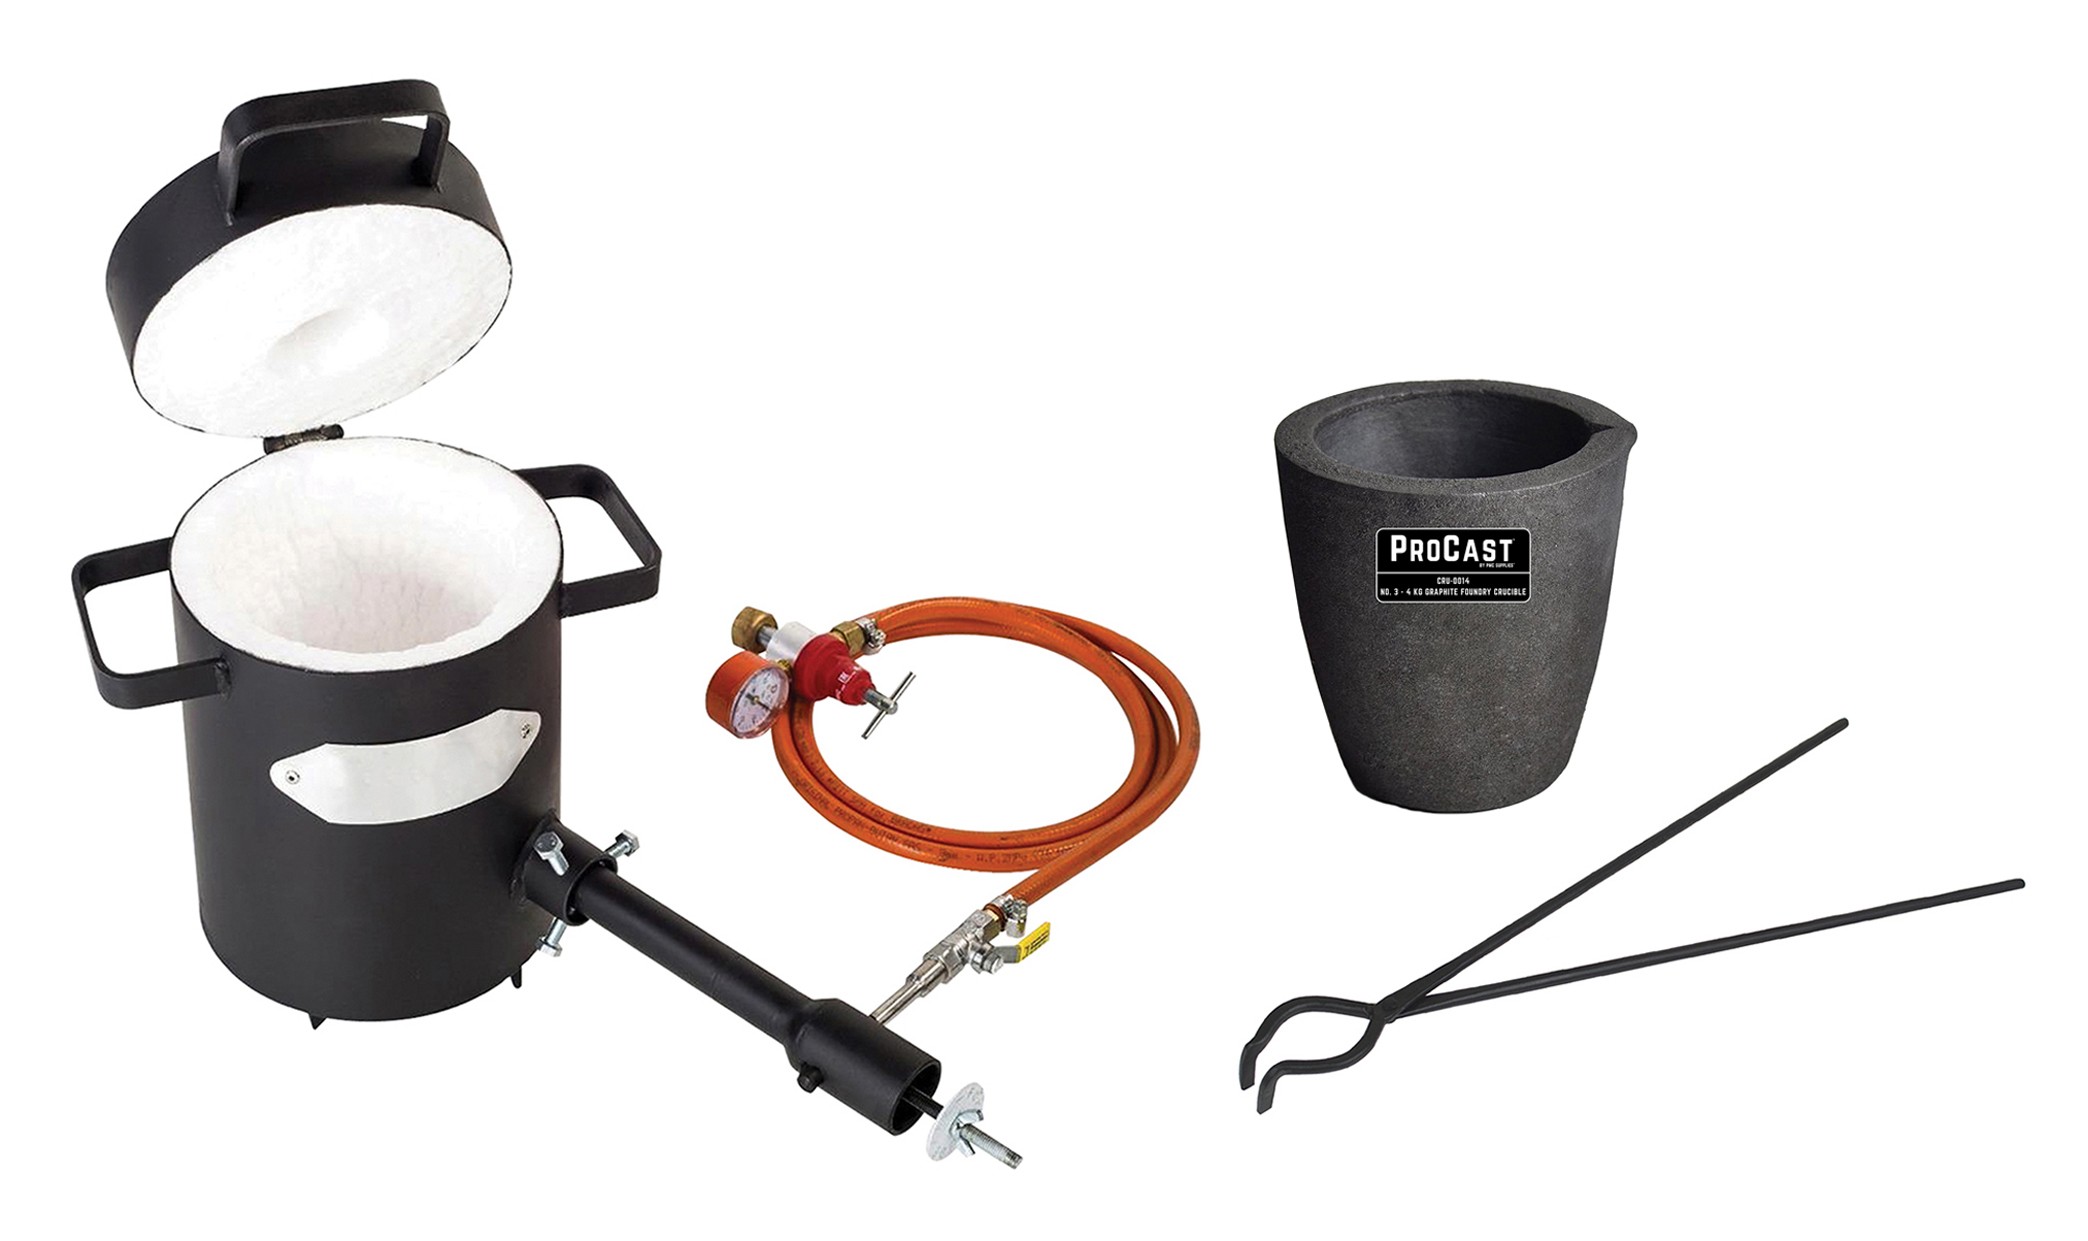 5 Kg Propane Furnace Sand Casting Set with 5 Lbs of Petrobond, Mold Frame,  Safety Gloves, Crucible, & Tongs, KIT-0144